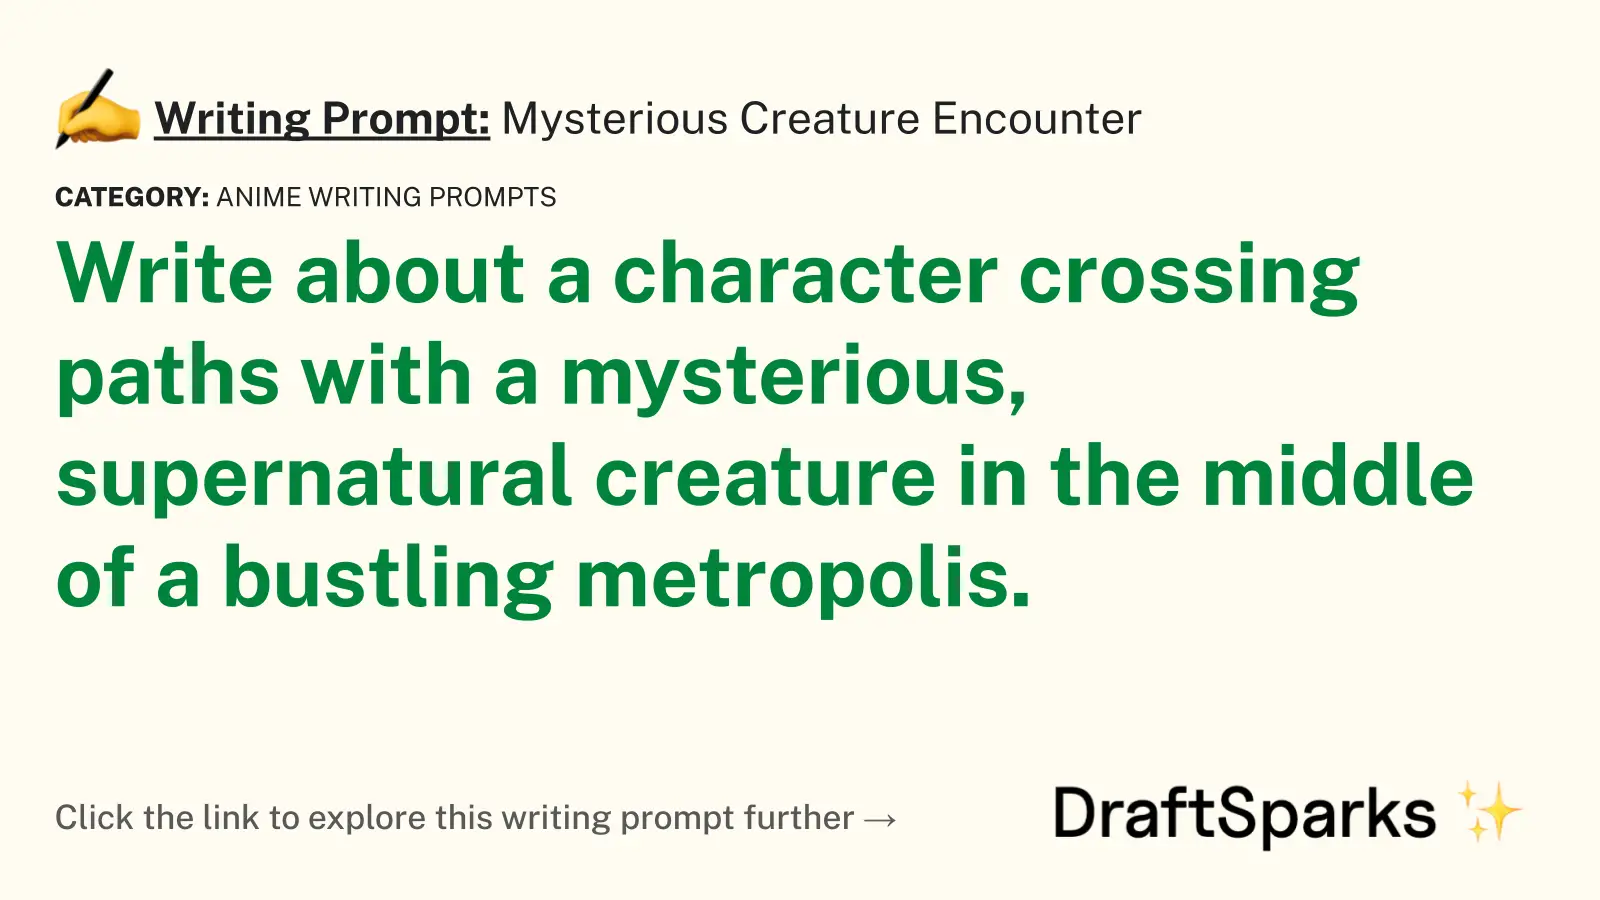 Mysterious Creature Encounter